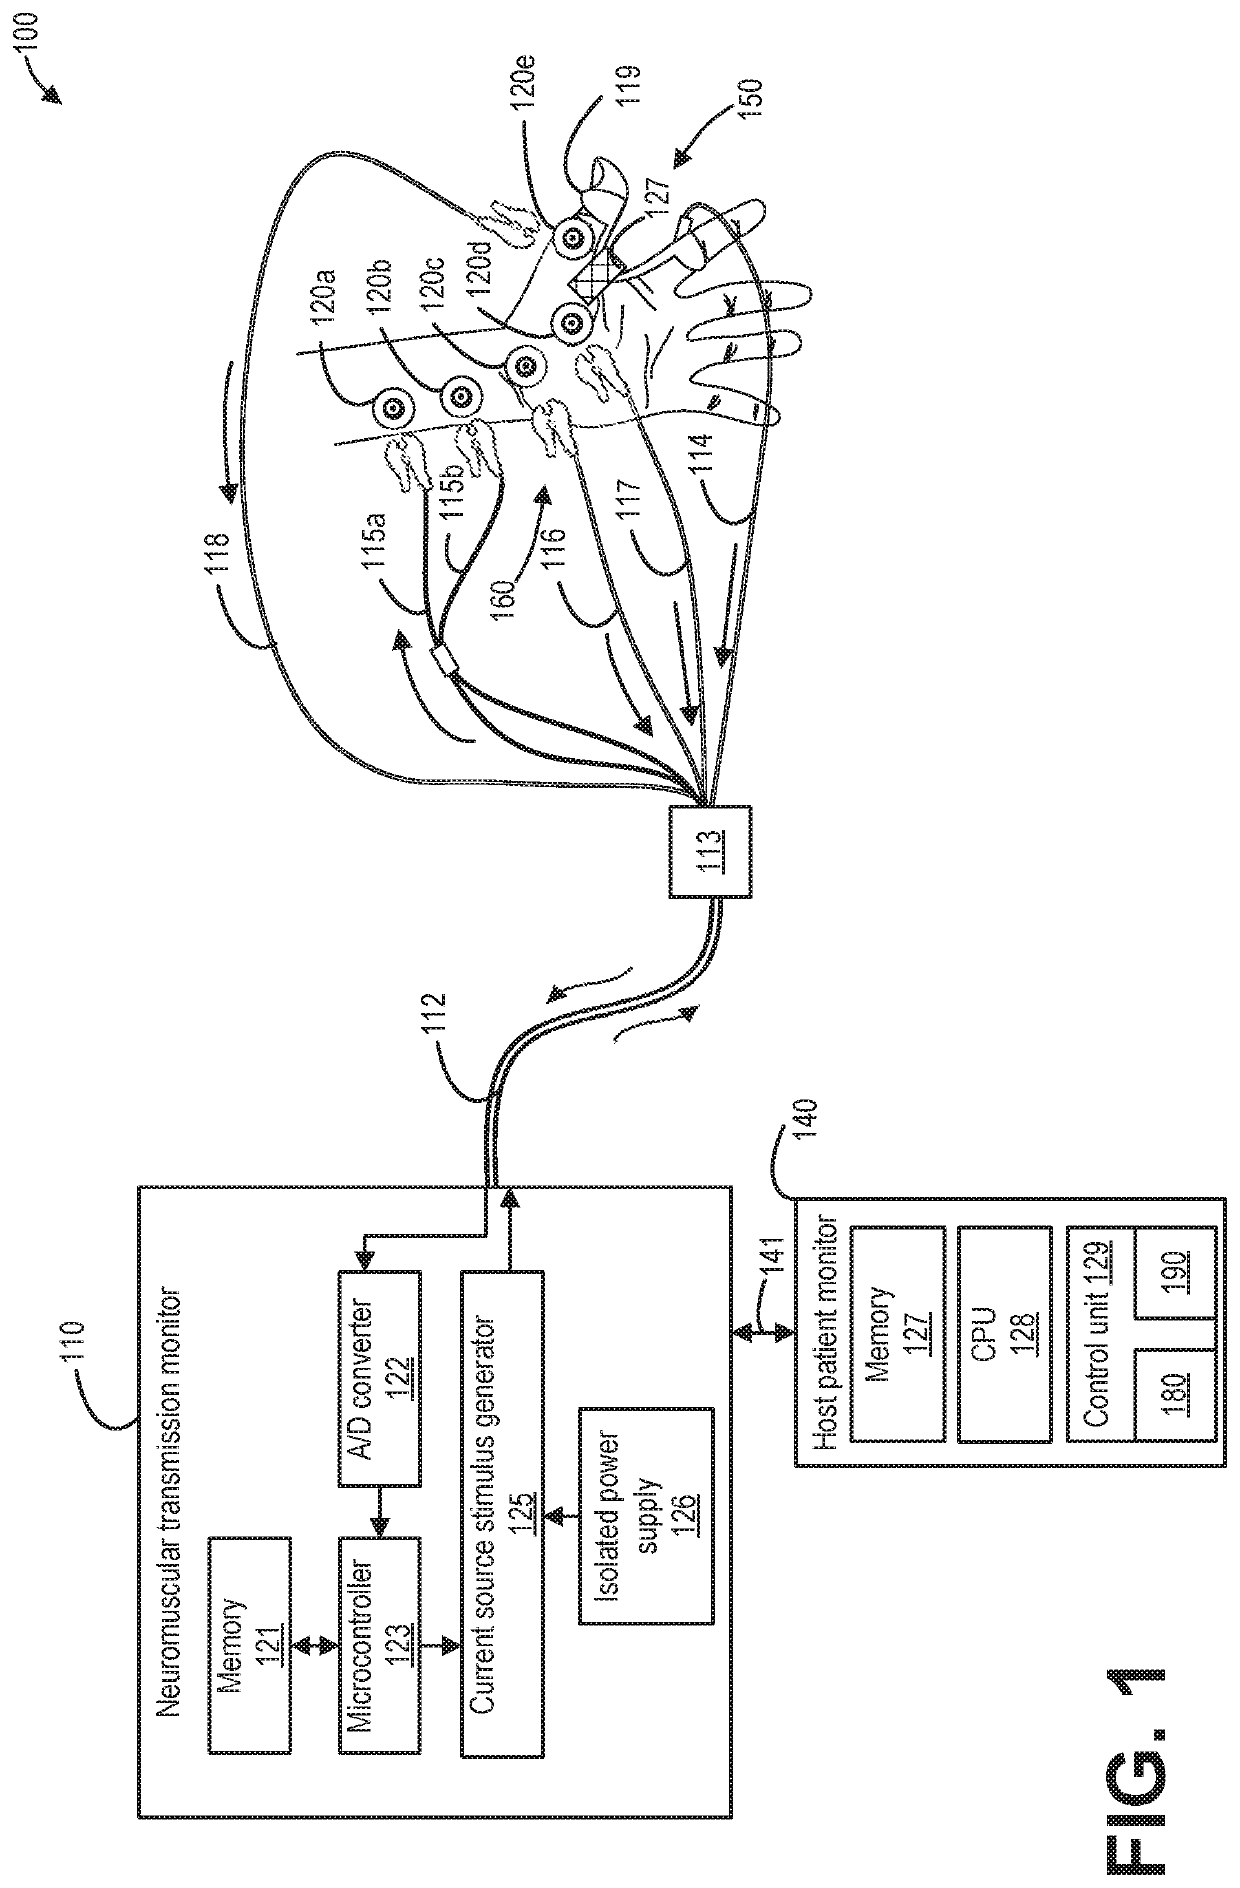 Method and system for neuromuscular transmission measurement